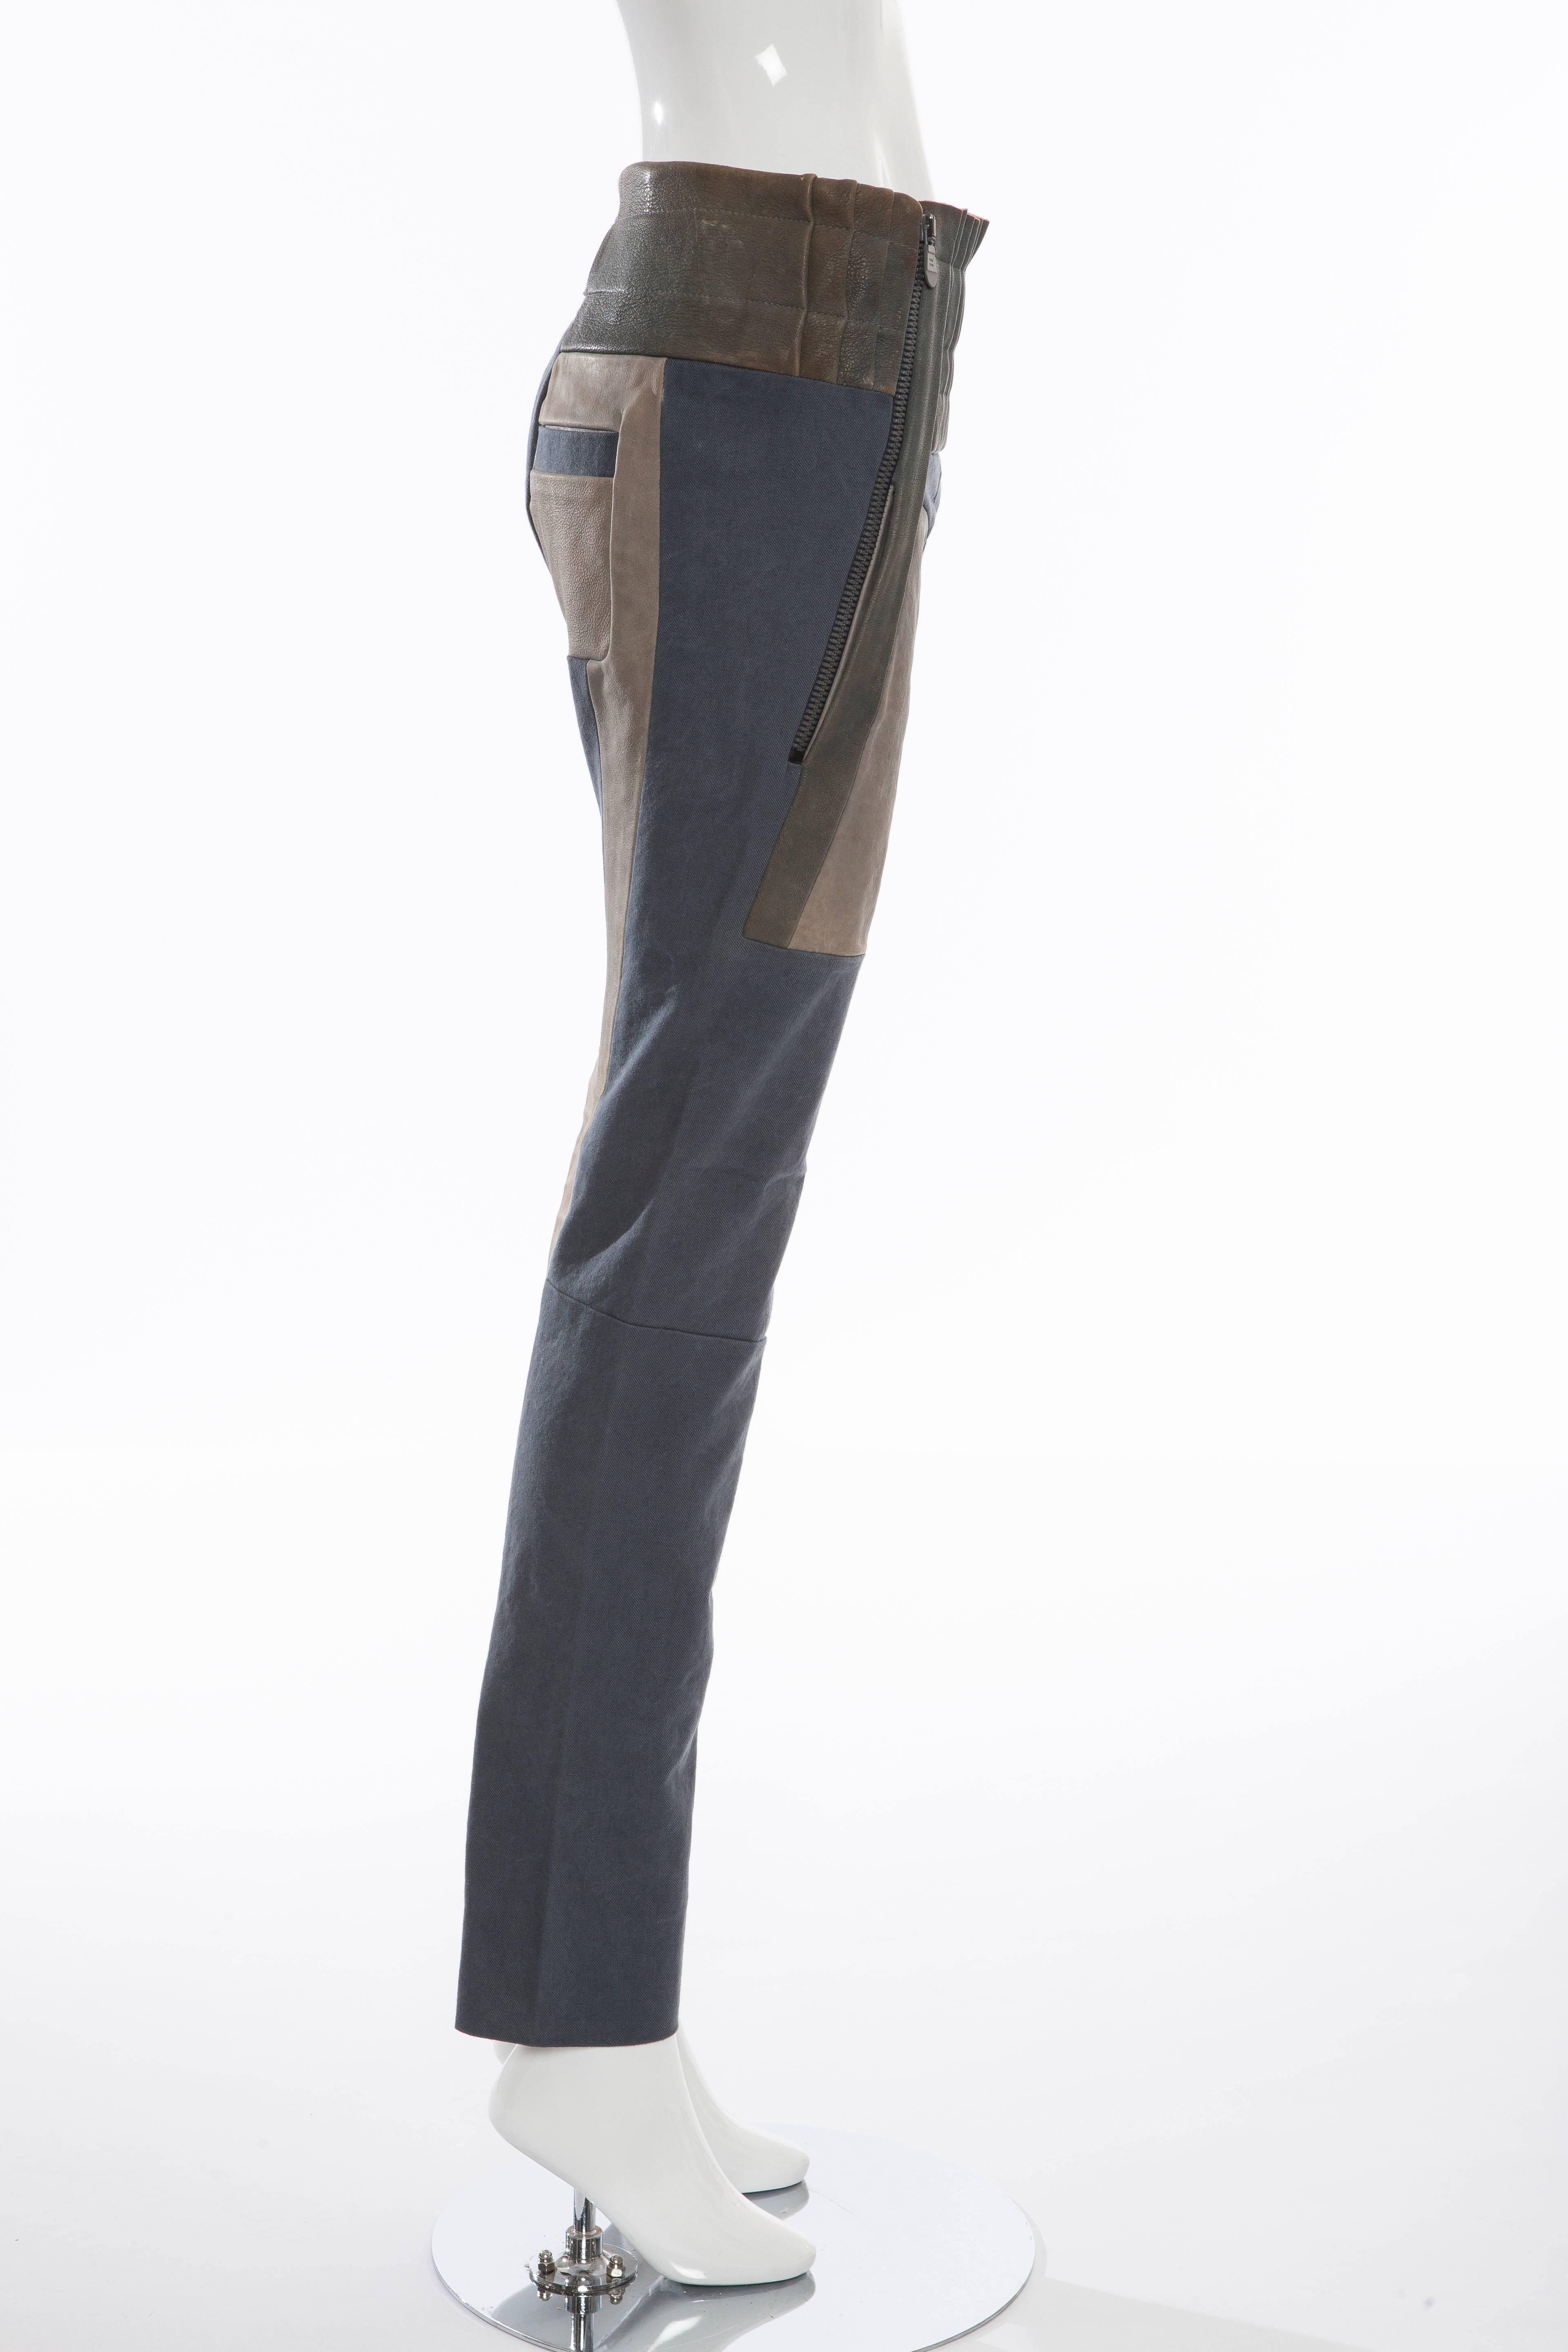 Balenciaga by Nicolas Ghesquière, Spring-Summer 2010, leather moto paneled pants with tonal stitching, elasticized waist, slit pockets at sides and dual exposed zip closure at front. 

Size not listed, estimated from measurements.

Small
Waist